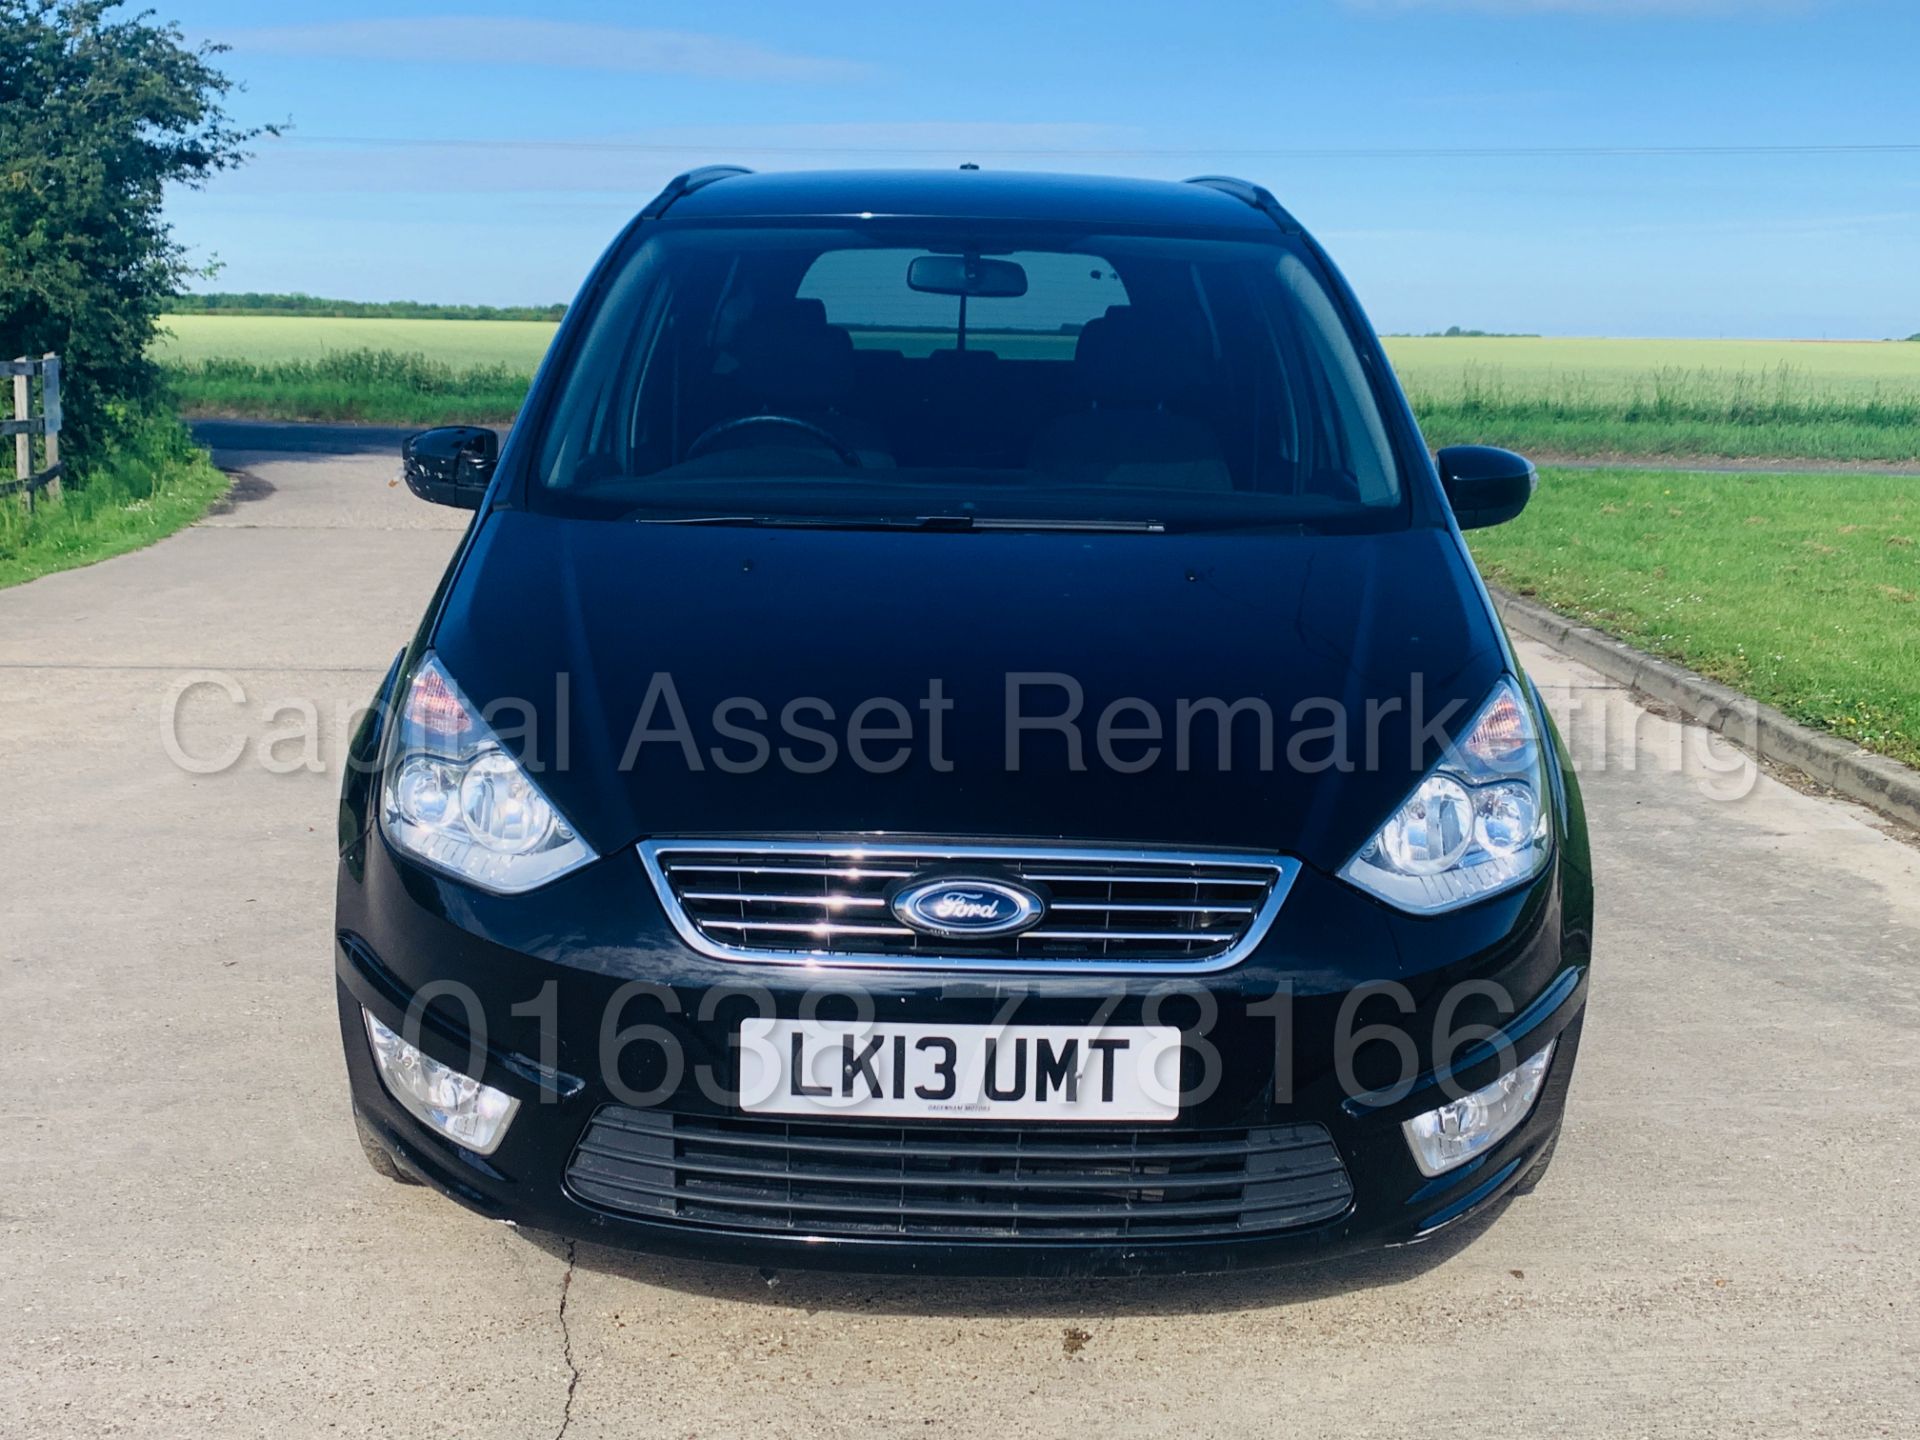 (ON SALE) FORD GALAXY *ZETEC* 7 SEATER MPV (2013) '2.0 TDCI - POWER SHIFT' (NO VAT - SAVE 20%) - Image 9 of 31